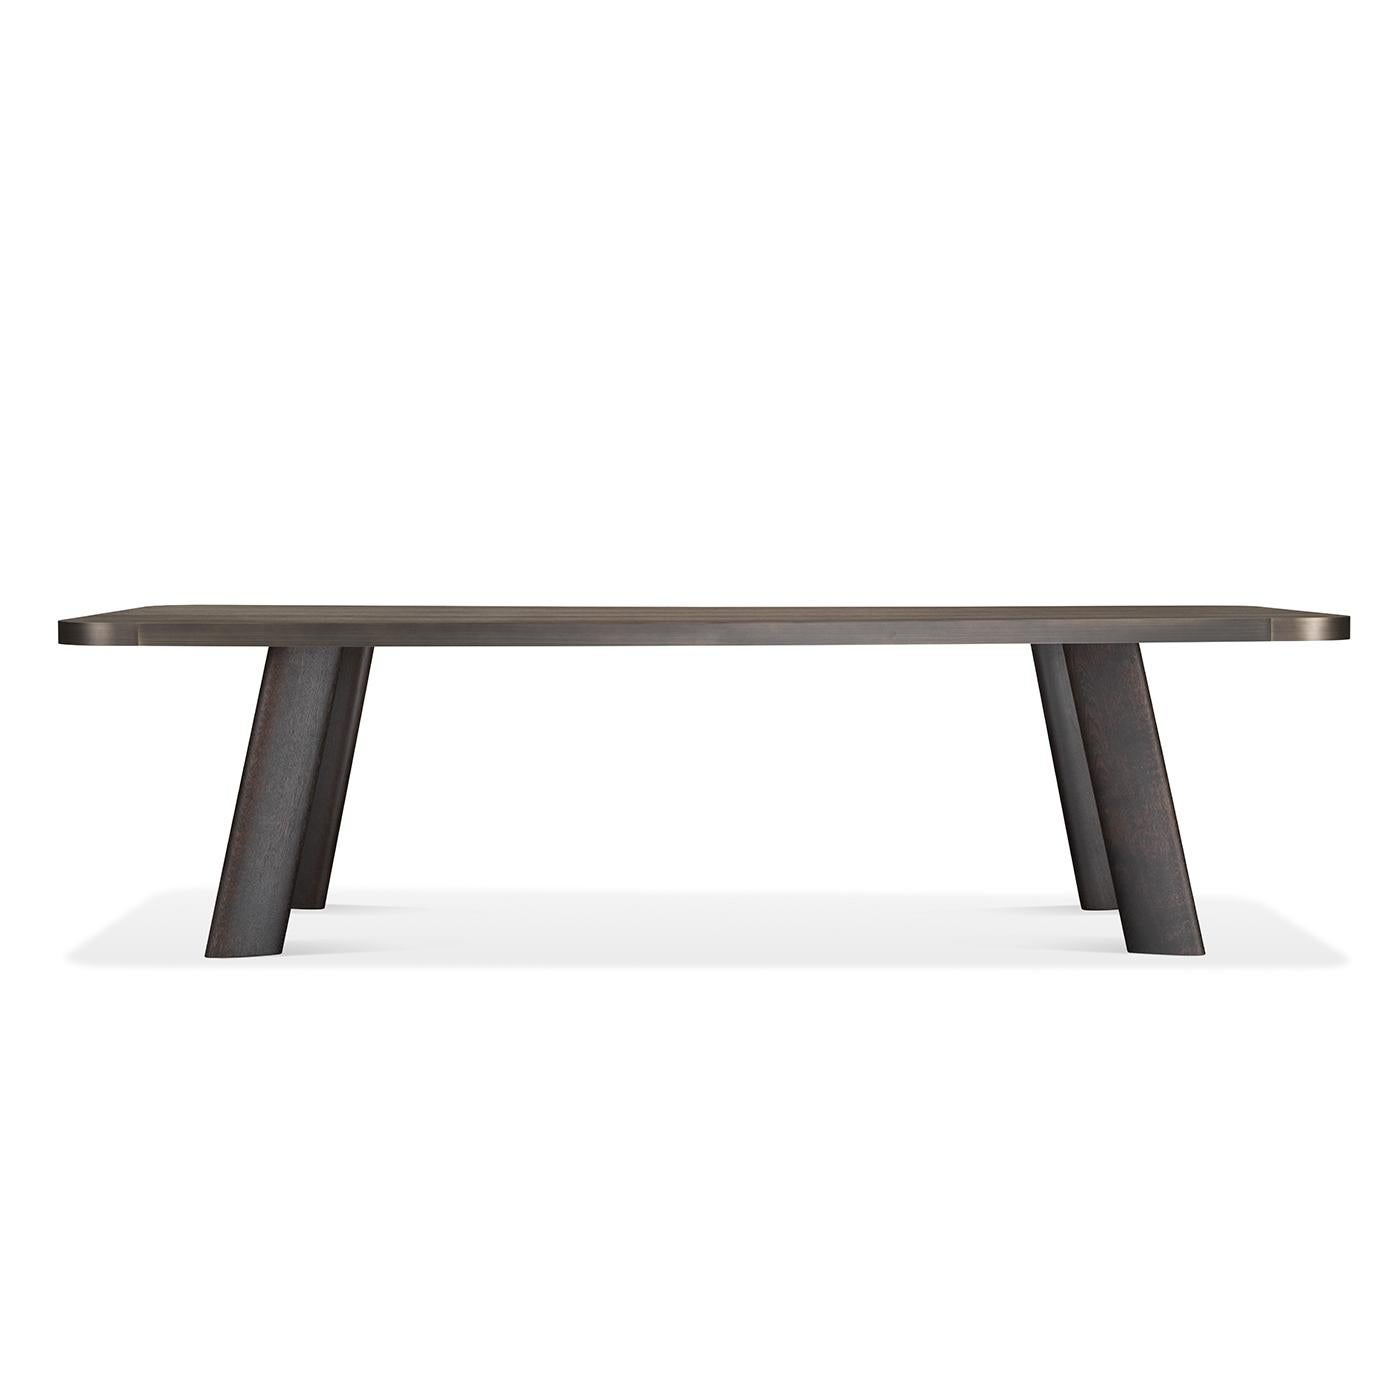 Modern Native Dark Rectangular Dining Table by Stefano Giovannoni For Sale